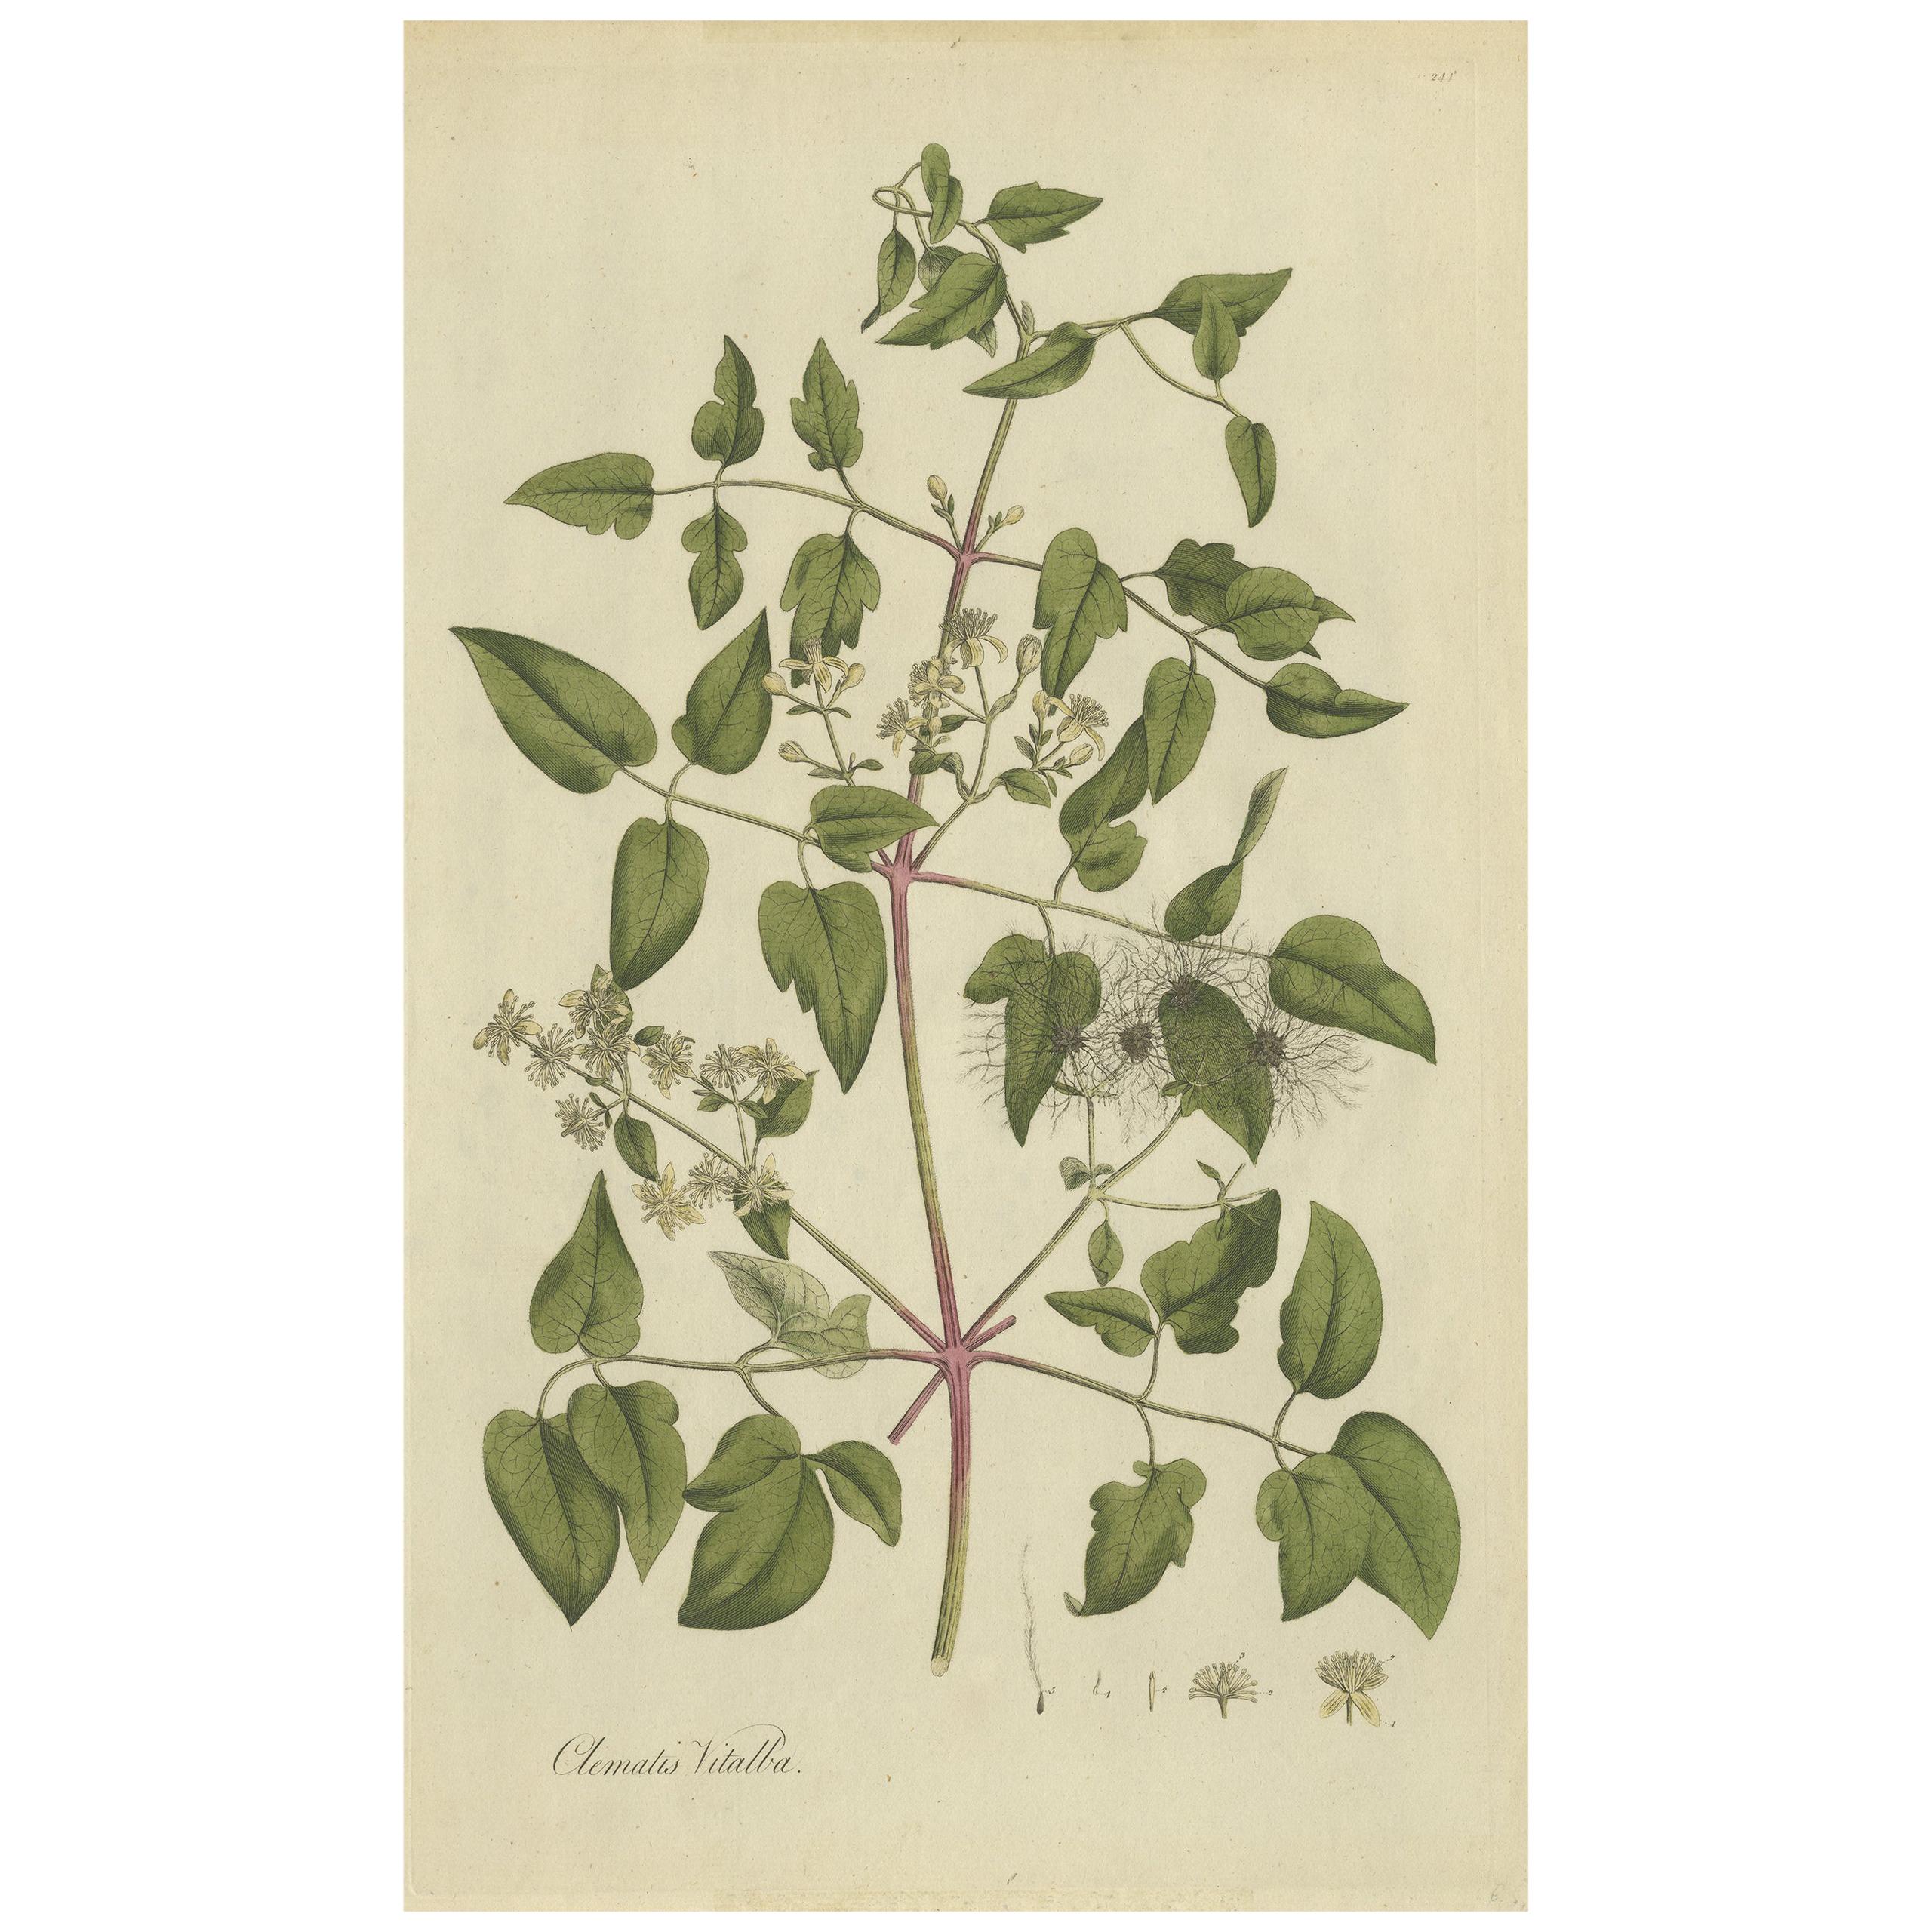 Antique Botany Print of the Clematis Vitalba by Curtis, circa 1777